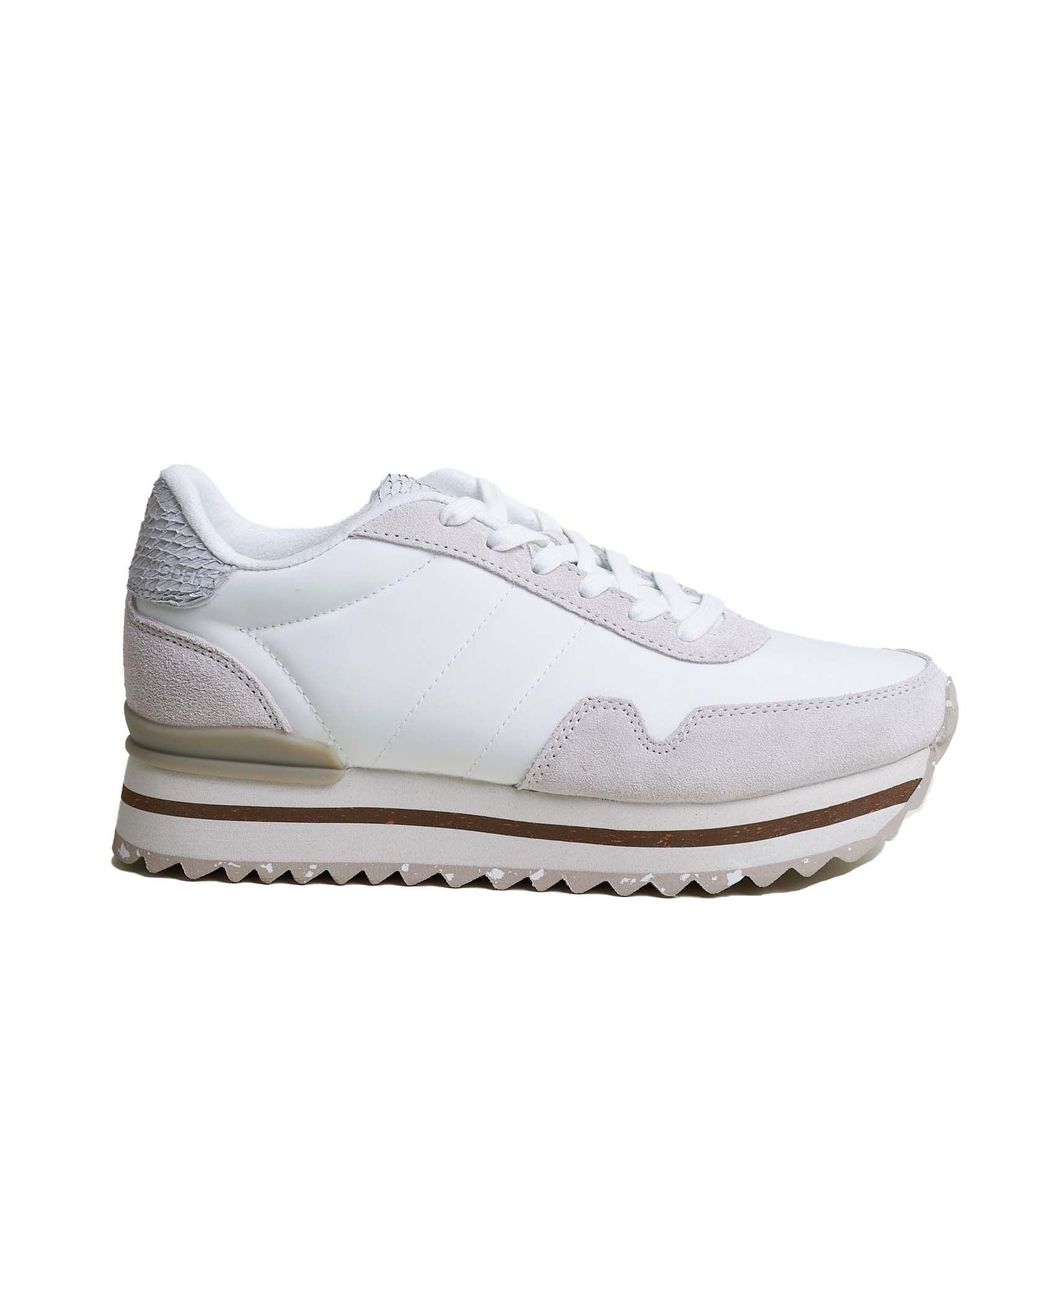 Woden Nora Iii Leather Plateau Trainers in White - Save 30% | Lyst